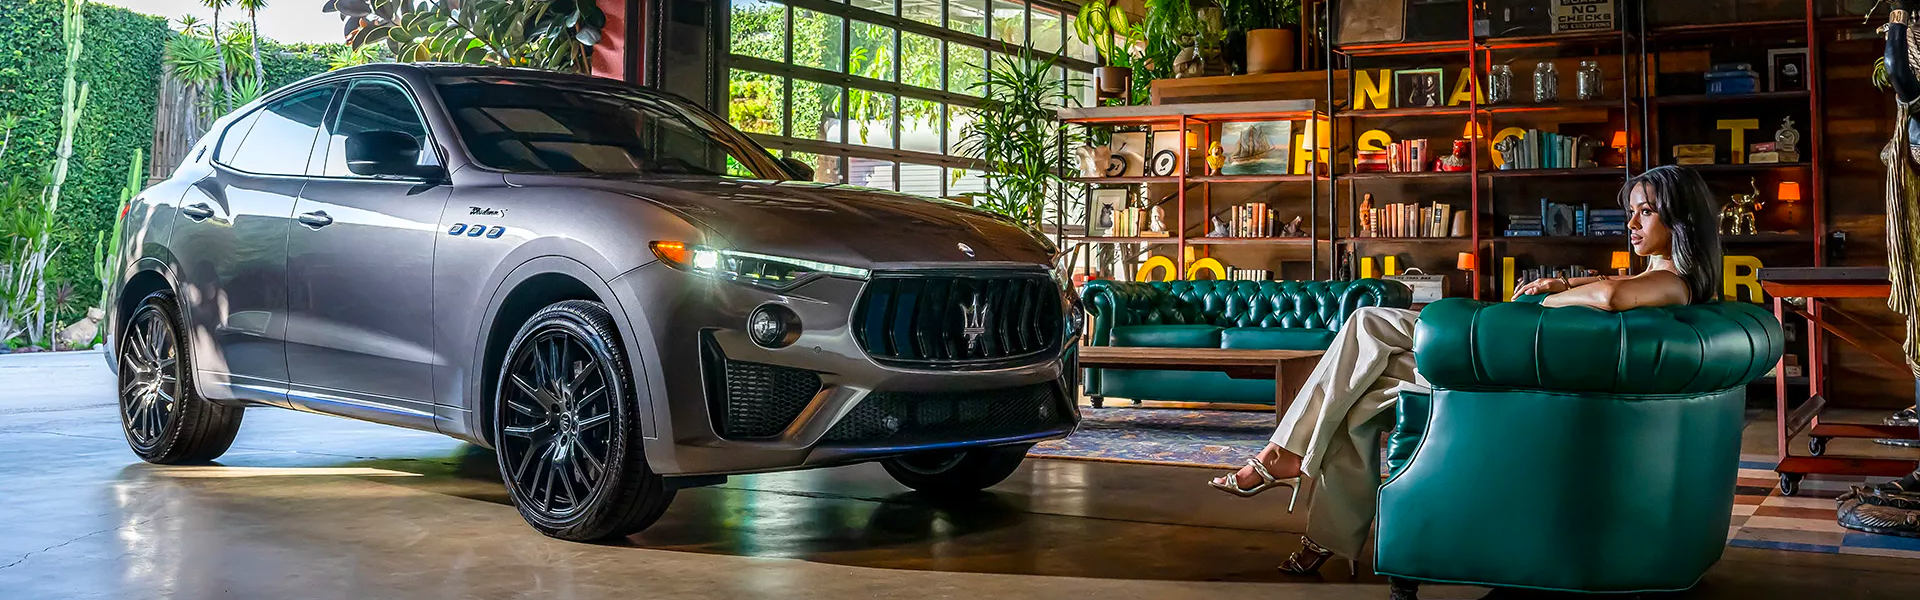 Maserati Levante parked in a garage next to a person on a couch.